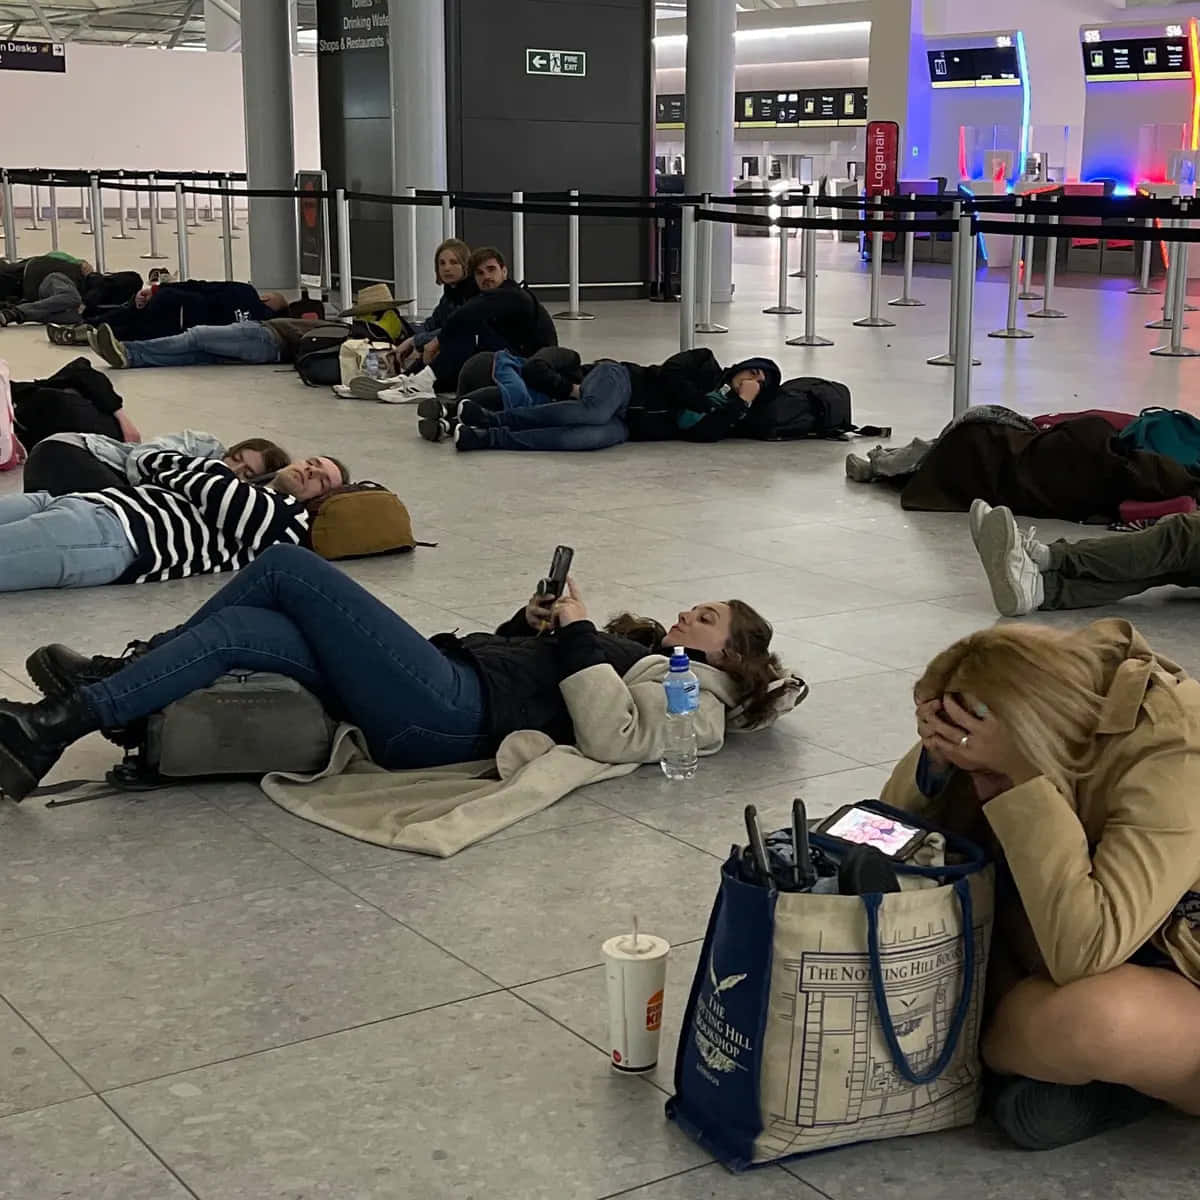 People Are Laying On The Floor In An Airport